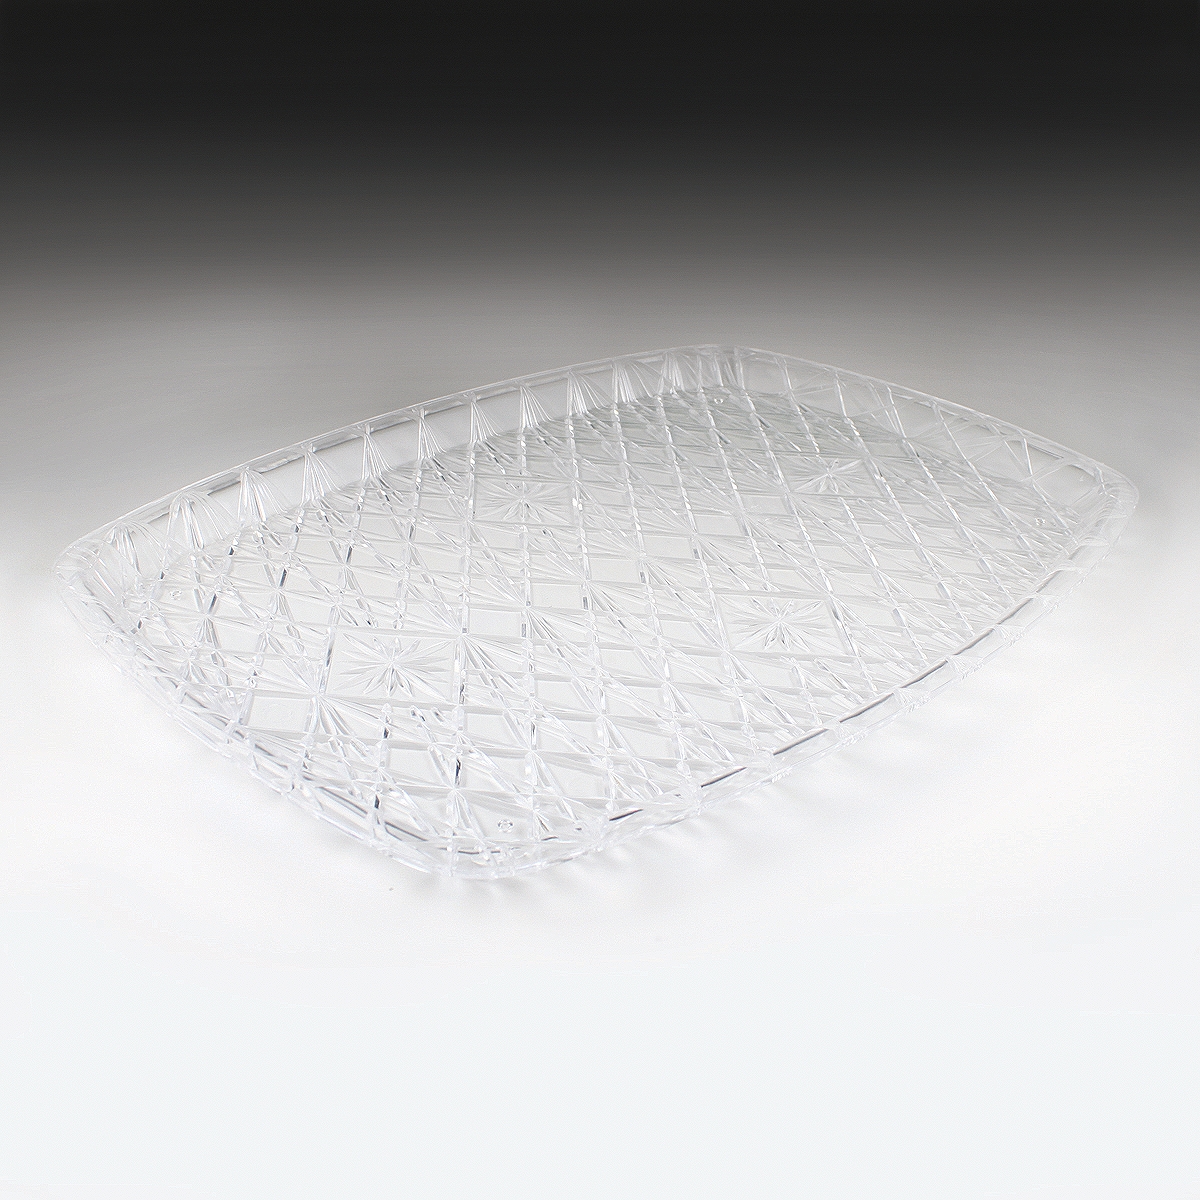 24 Trays, 16 x 11 Clear Rectangular with Groove Rim Plastic Serving Trays